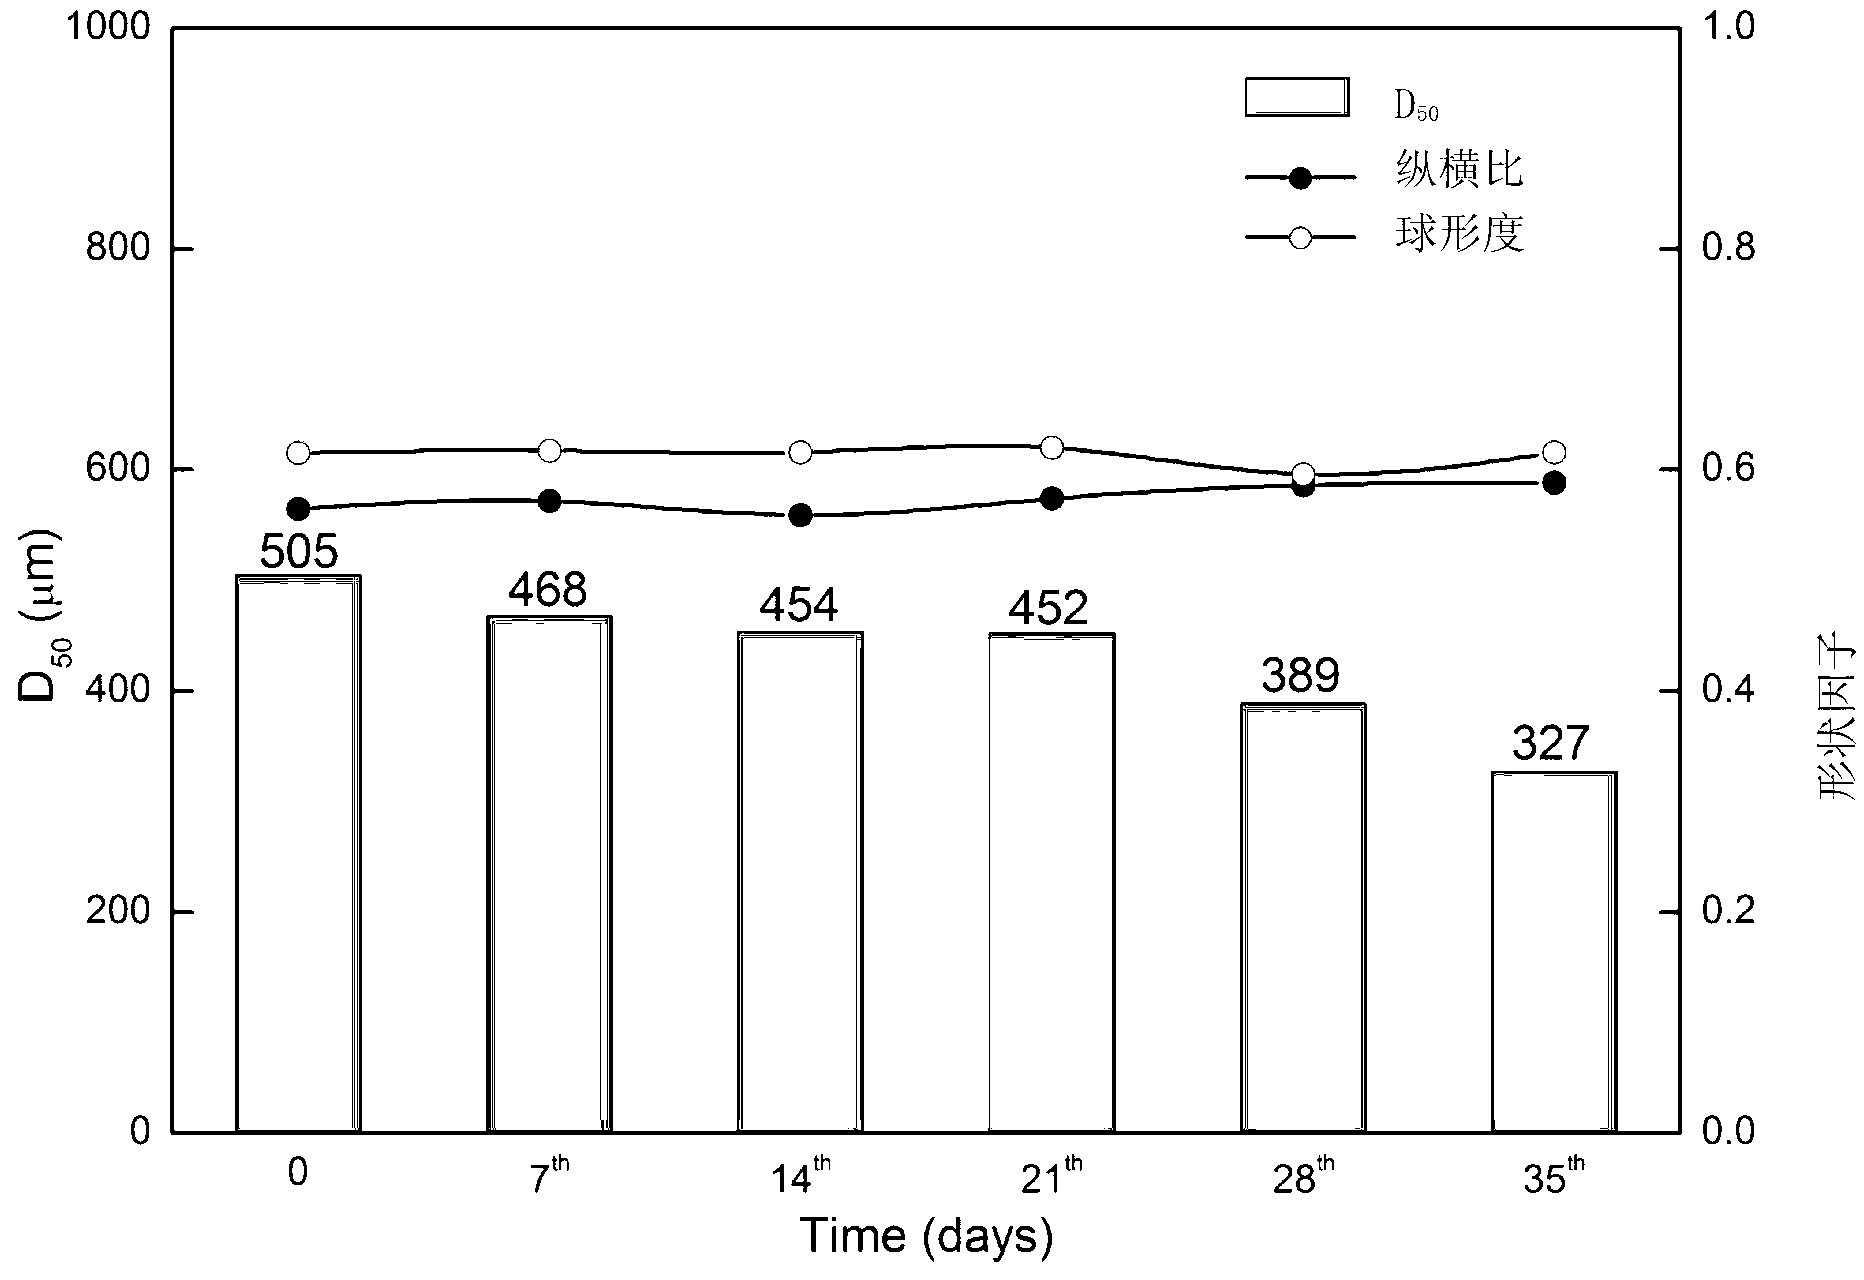 Method of obtaining characteristic parameters of aerobic composting microstructure